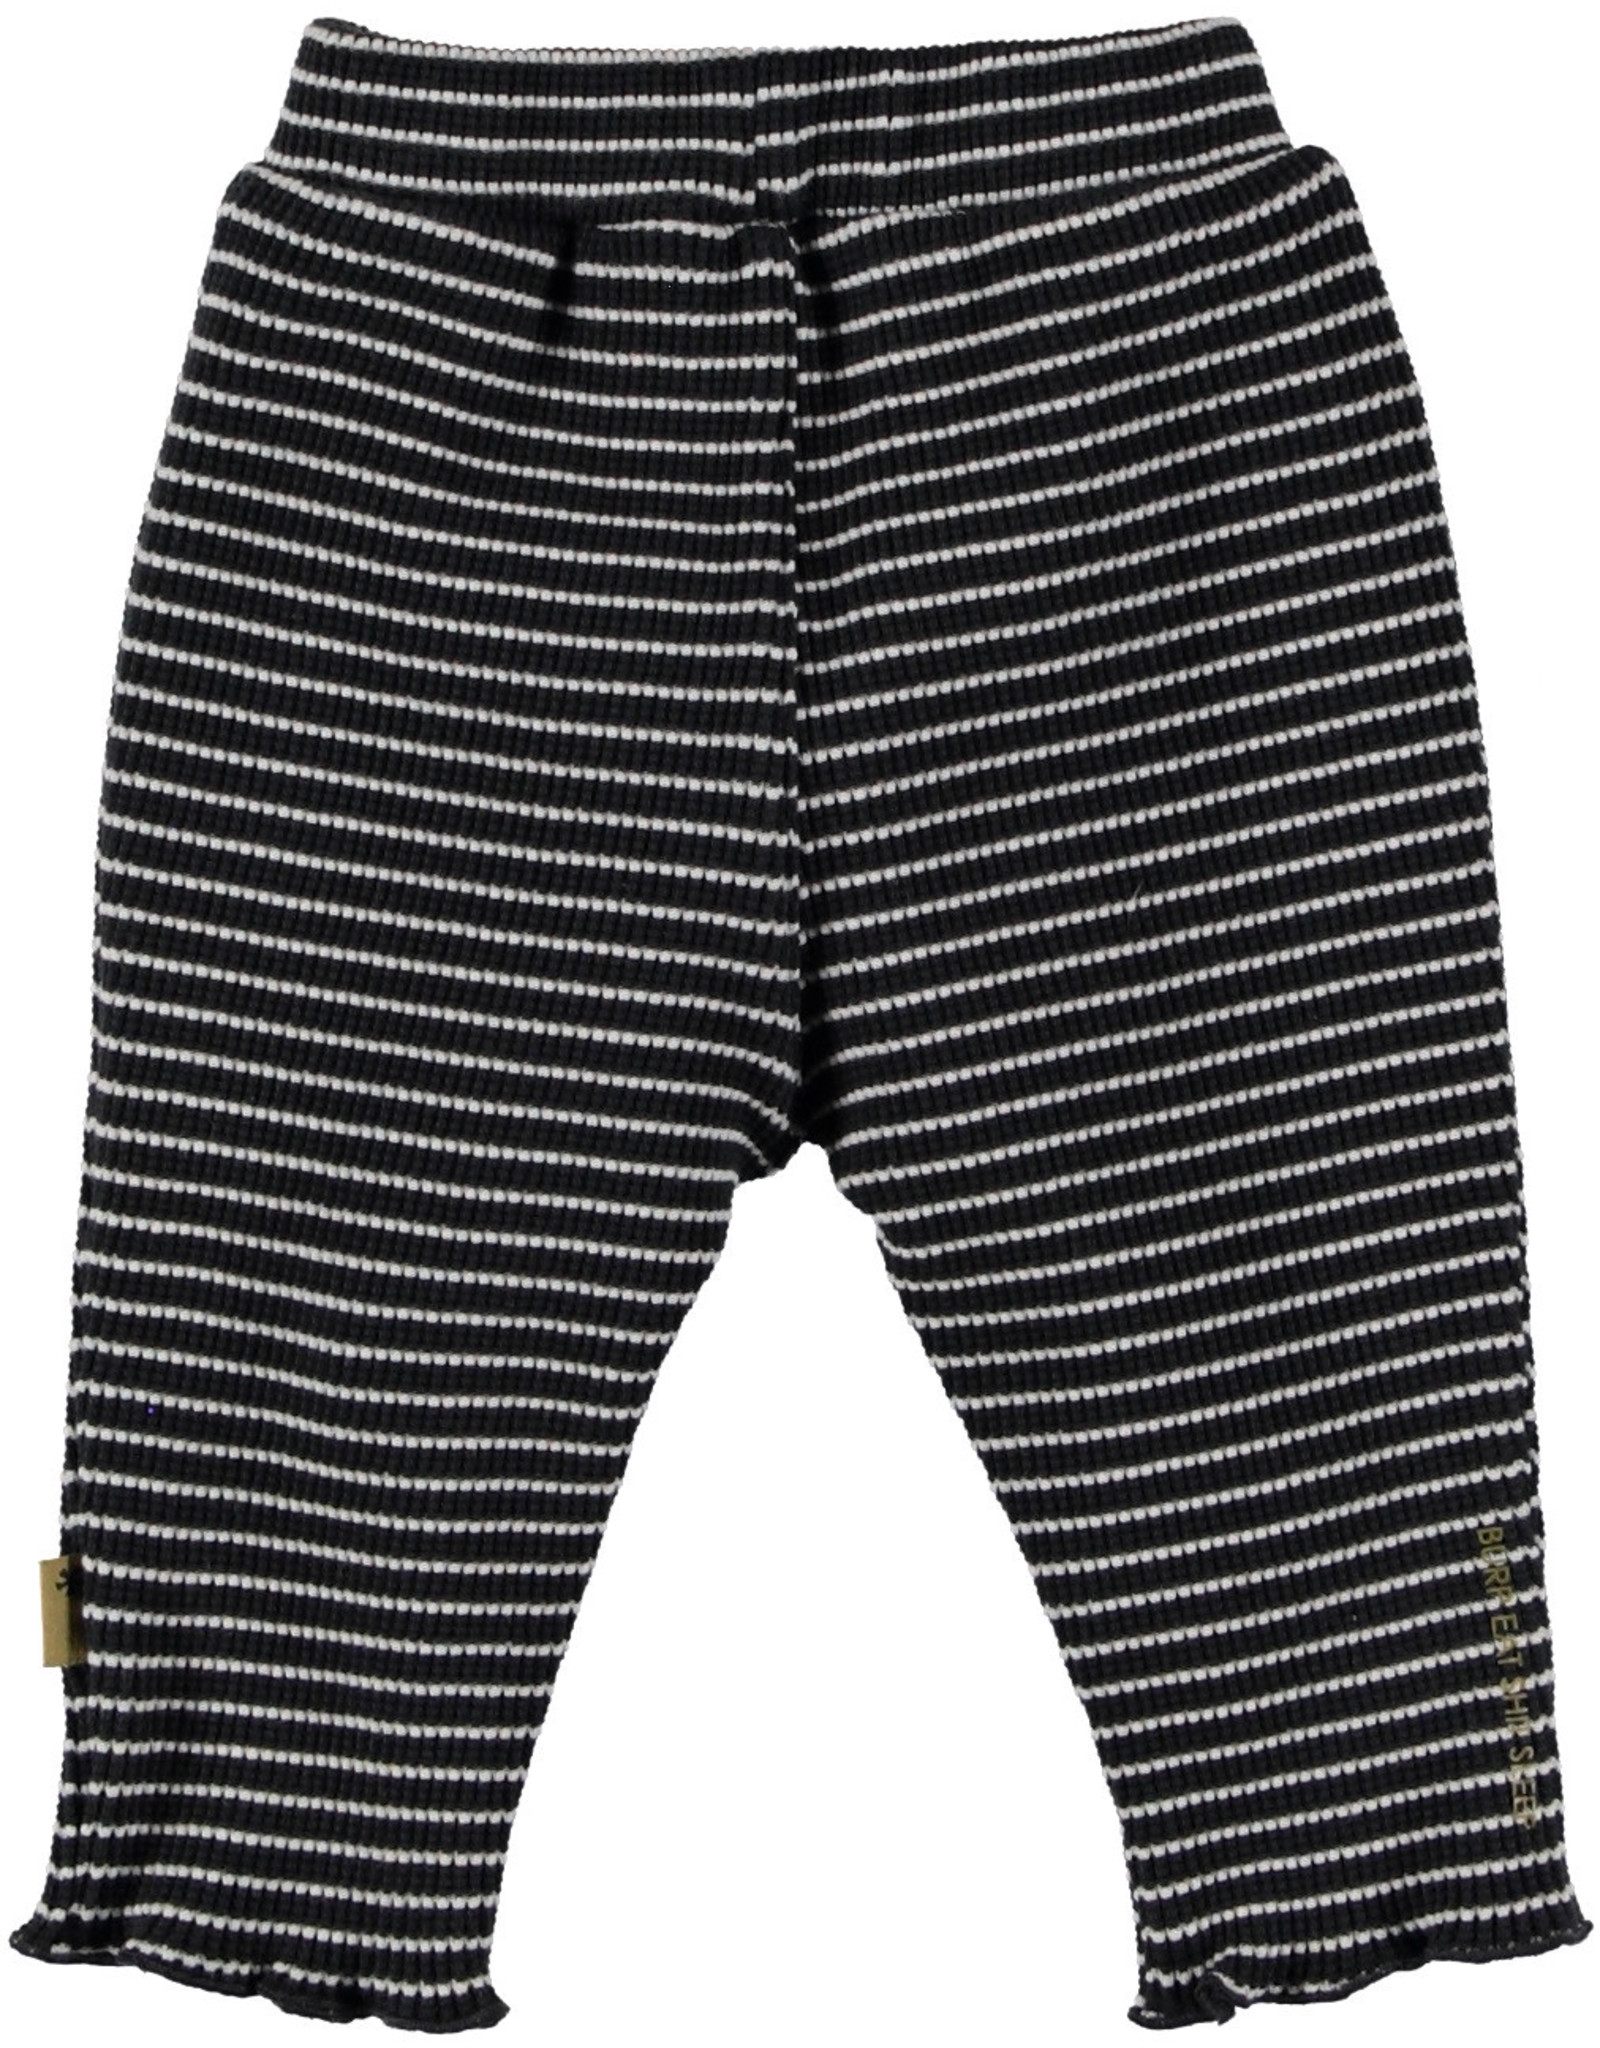 BESS Pants Striped Bow Anthracite